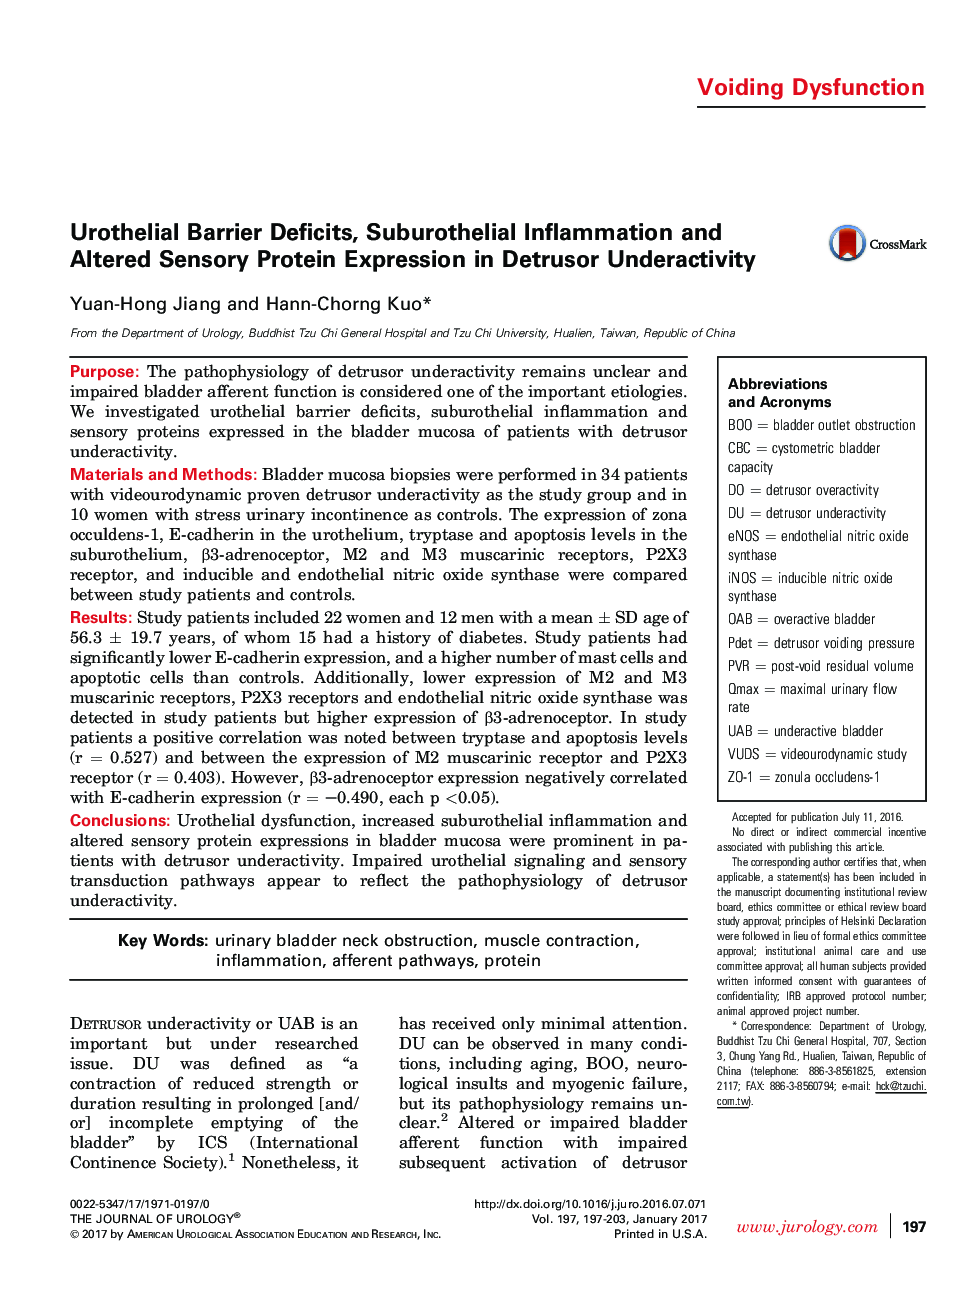 Urothelial Barrier Deficits, Suburothelial Inflammation and Altered Sensory Protein Expression in Detrusor Underactivity